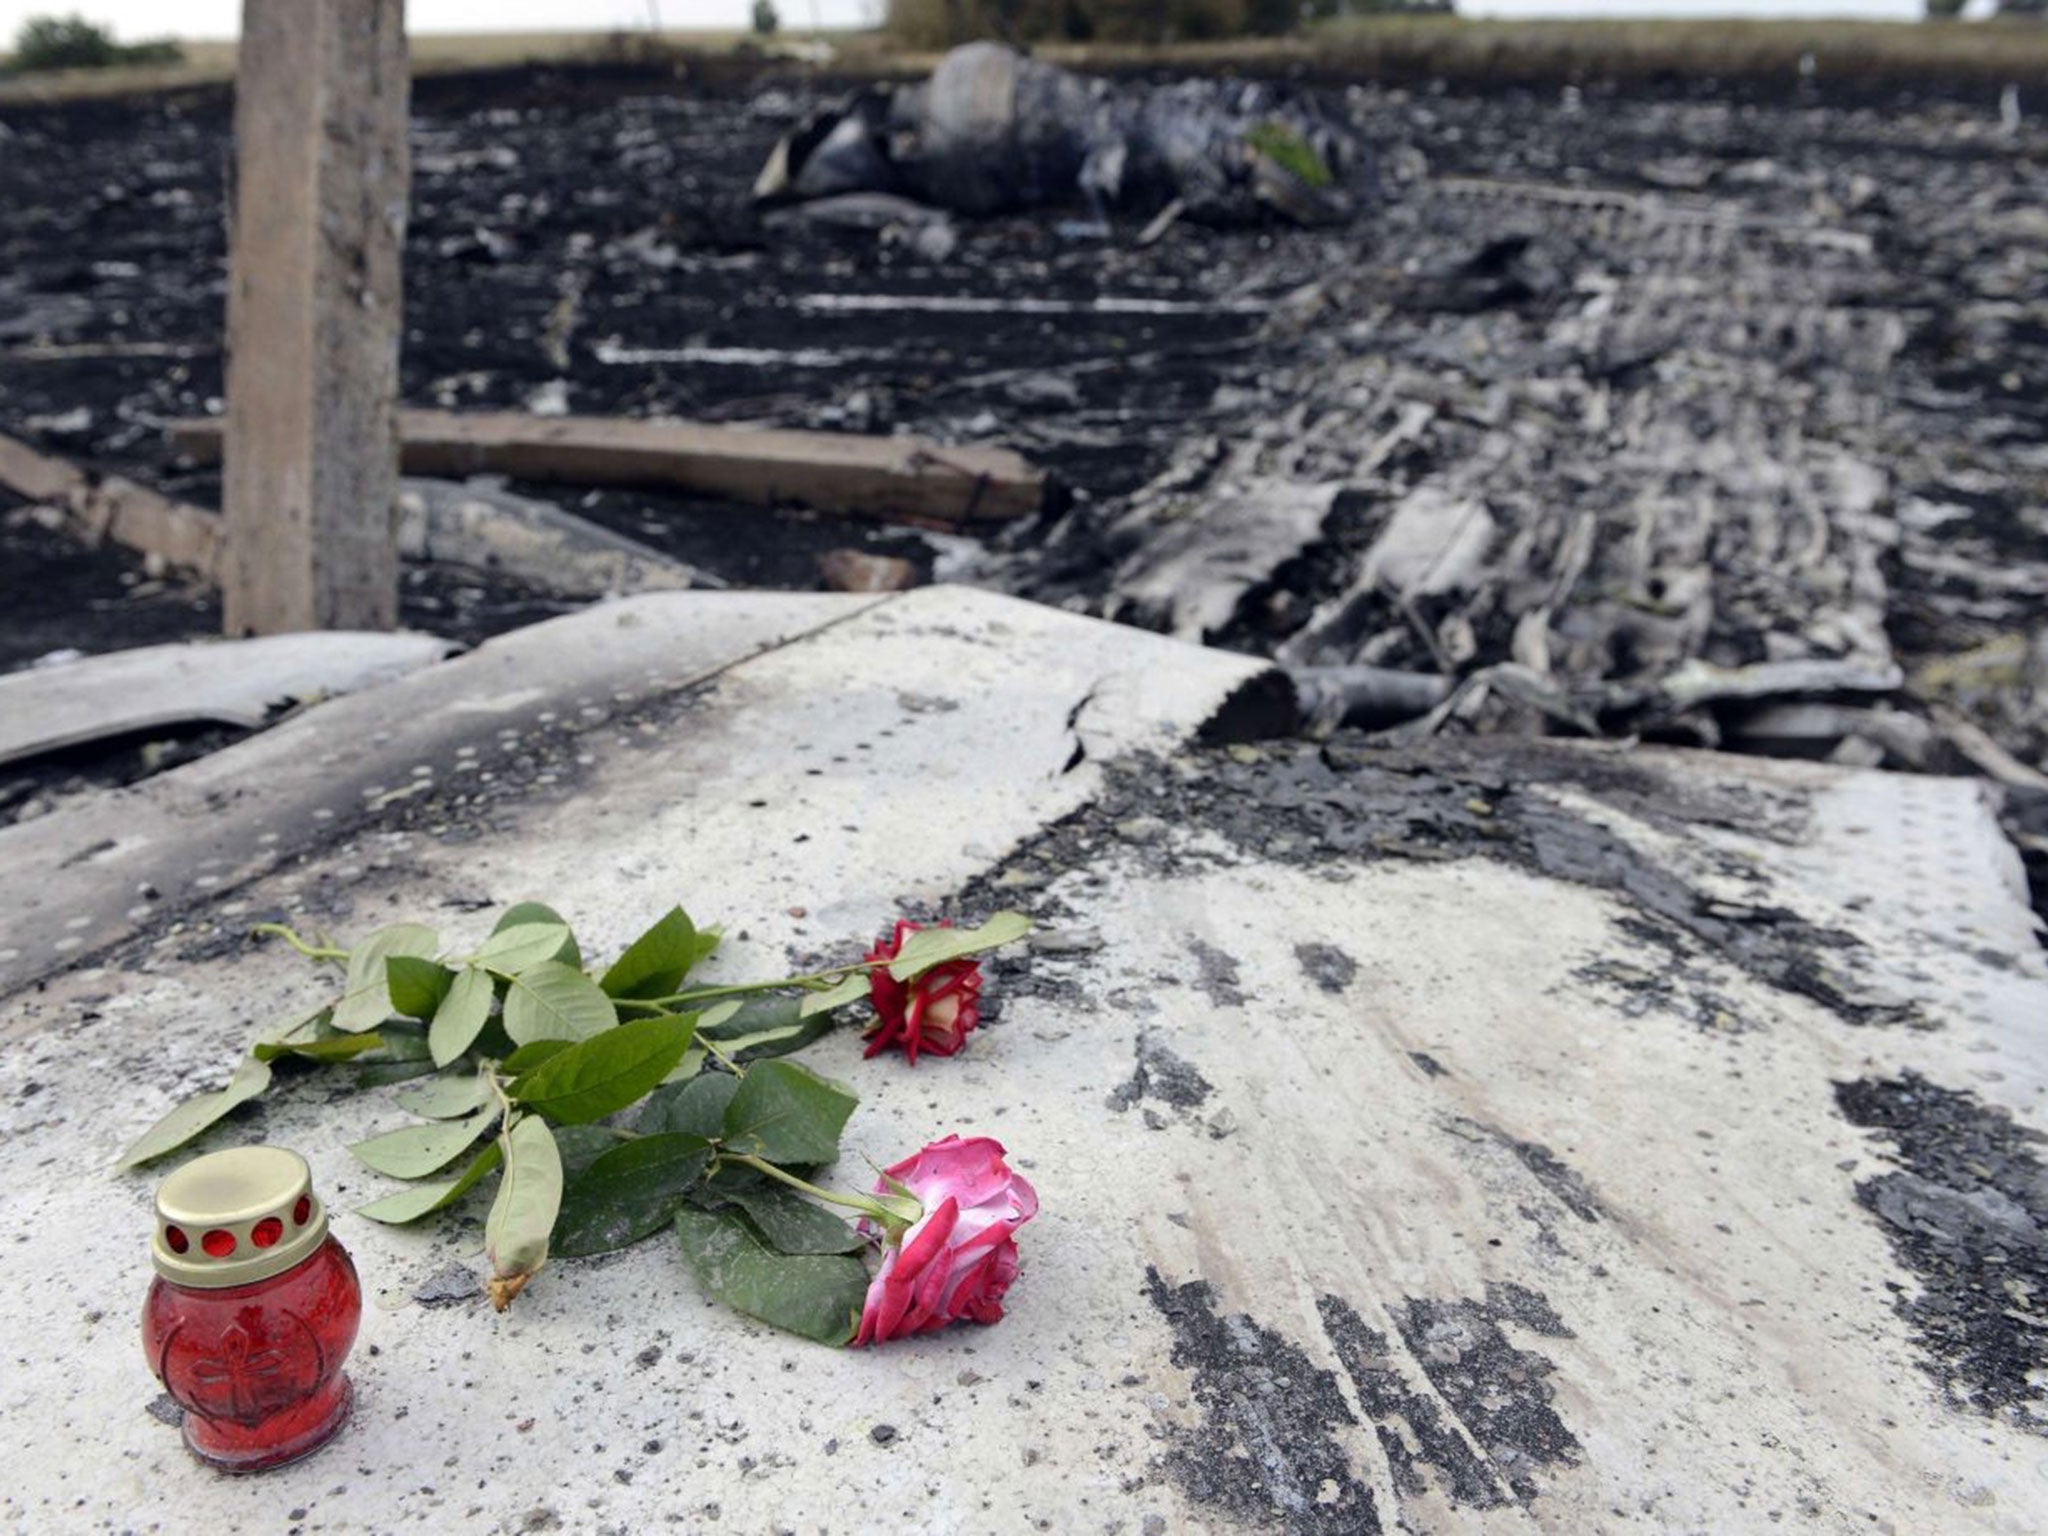 Aftermath: Flowers at the crash site